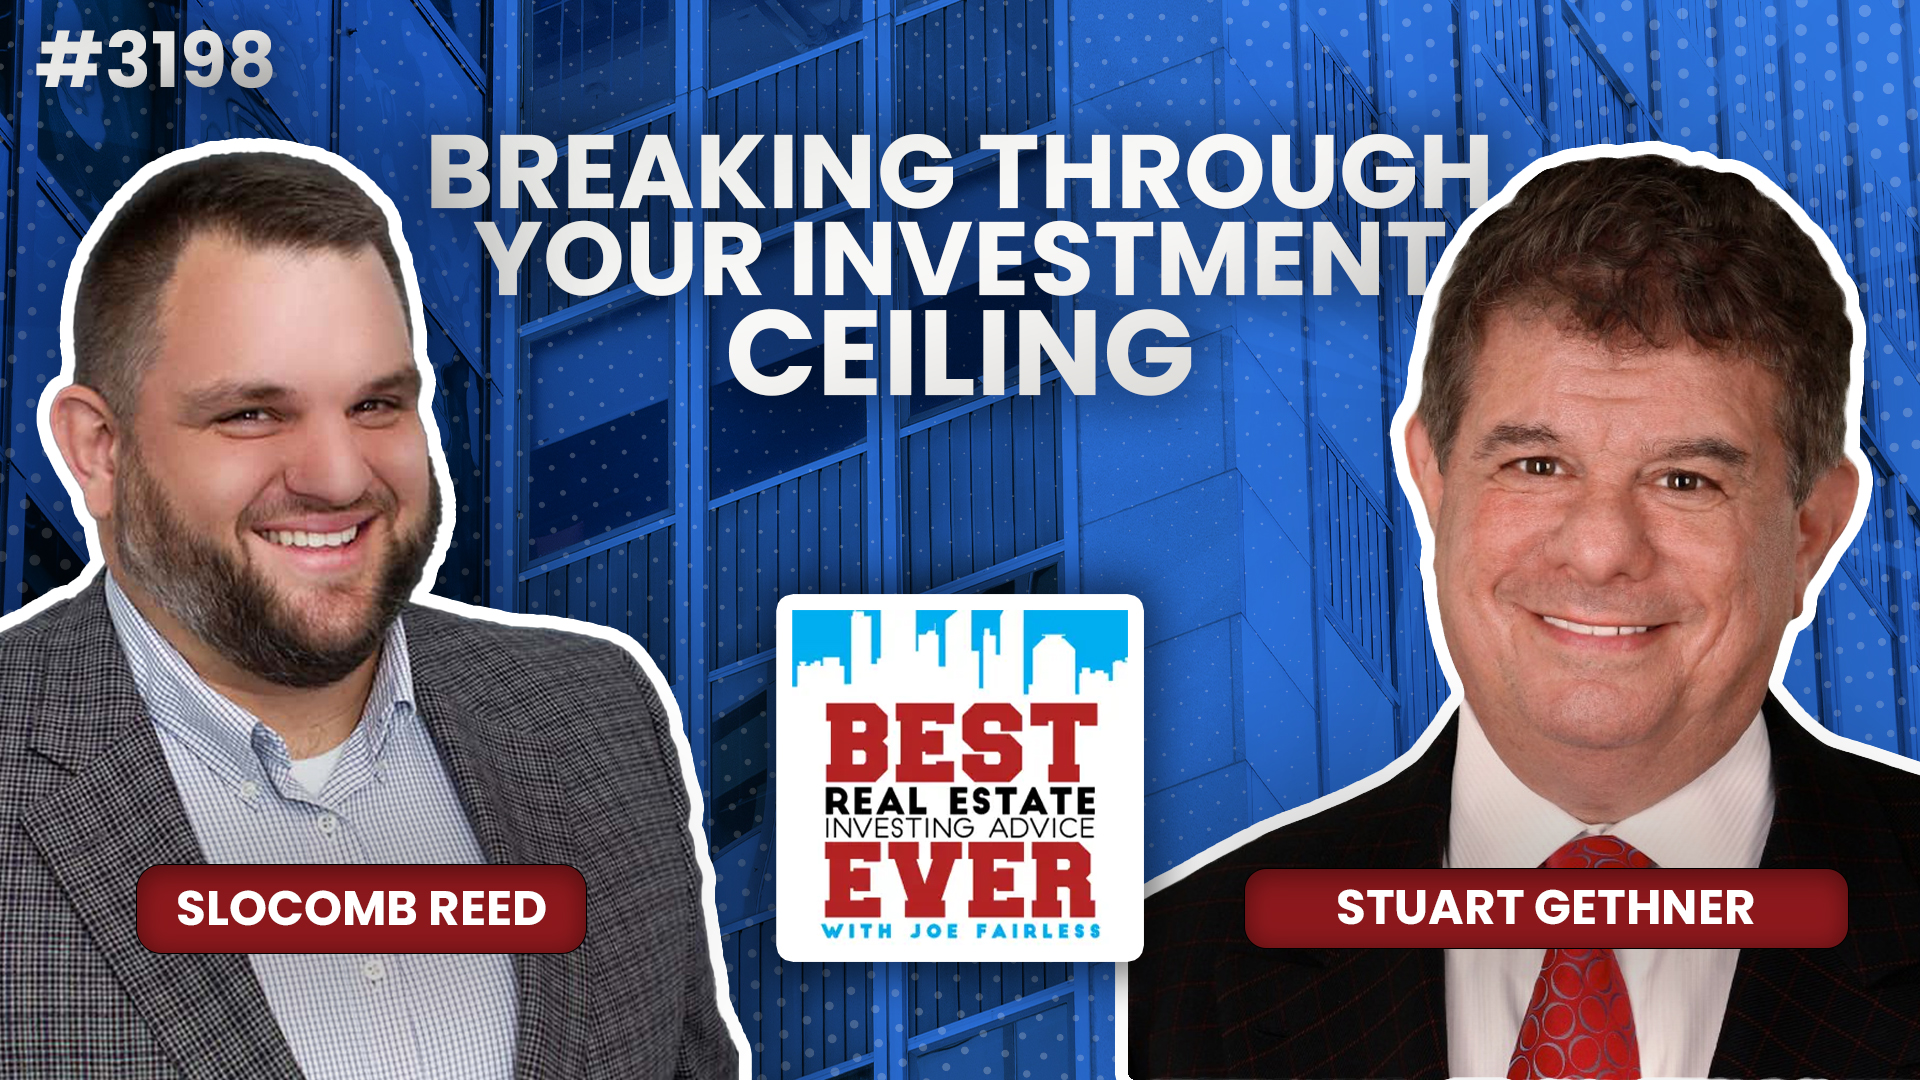 JF3198: Breaking Through Your Investment Ceiling ft. Stuart Gethner